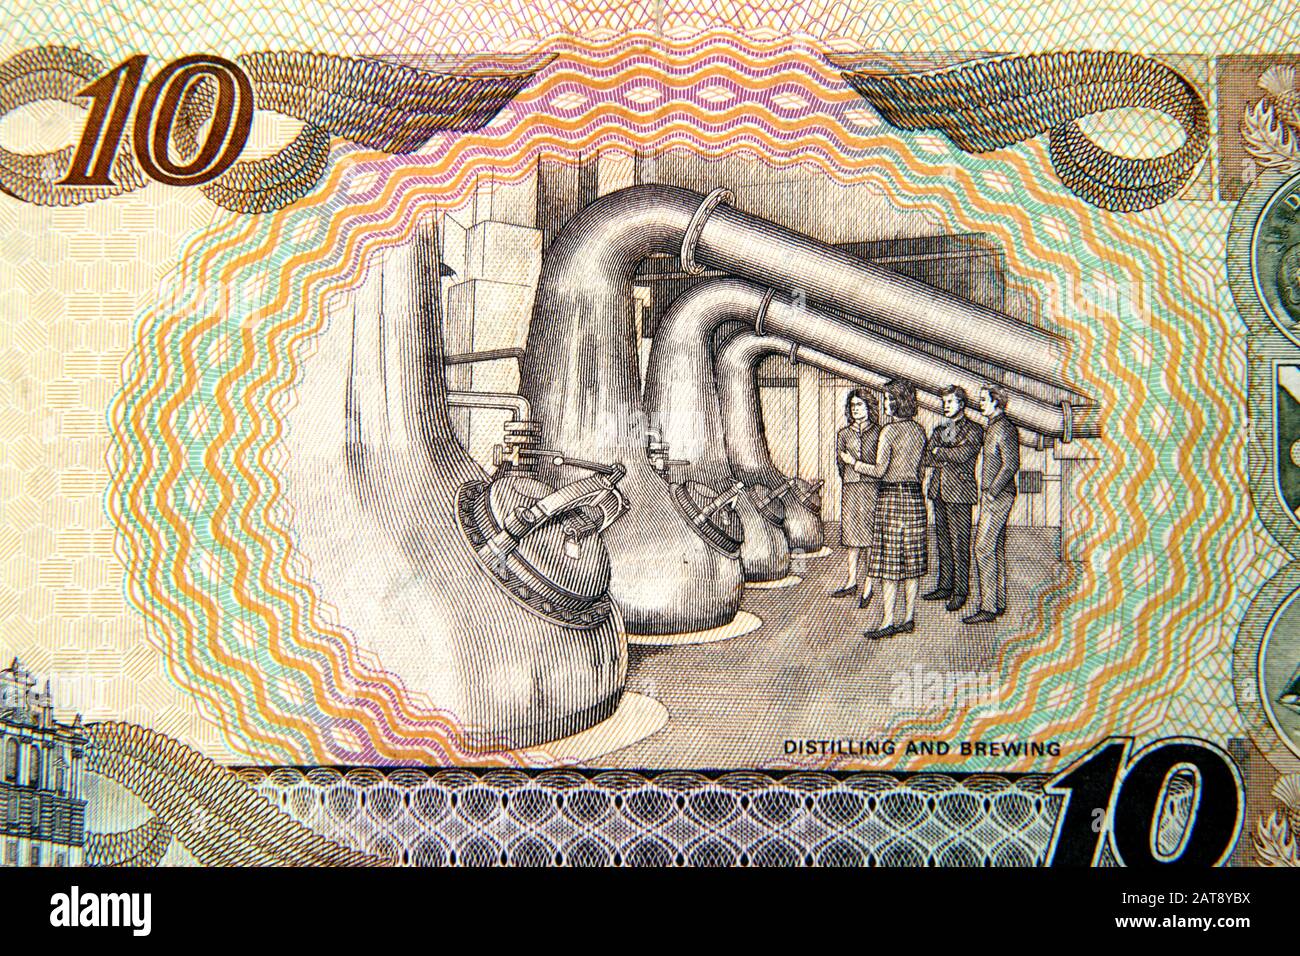 Old 1995 Bank of Scotland Tercentenary Ten Pound Note Depicting Distilling and Brewing Stock Photo